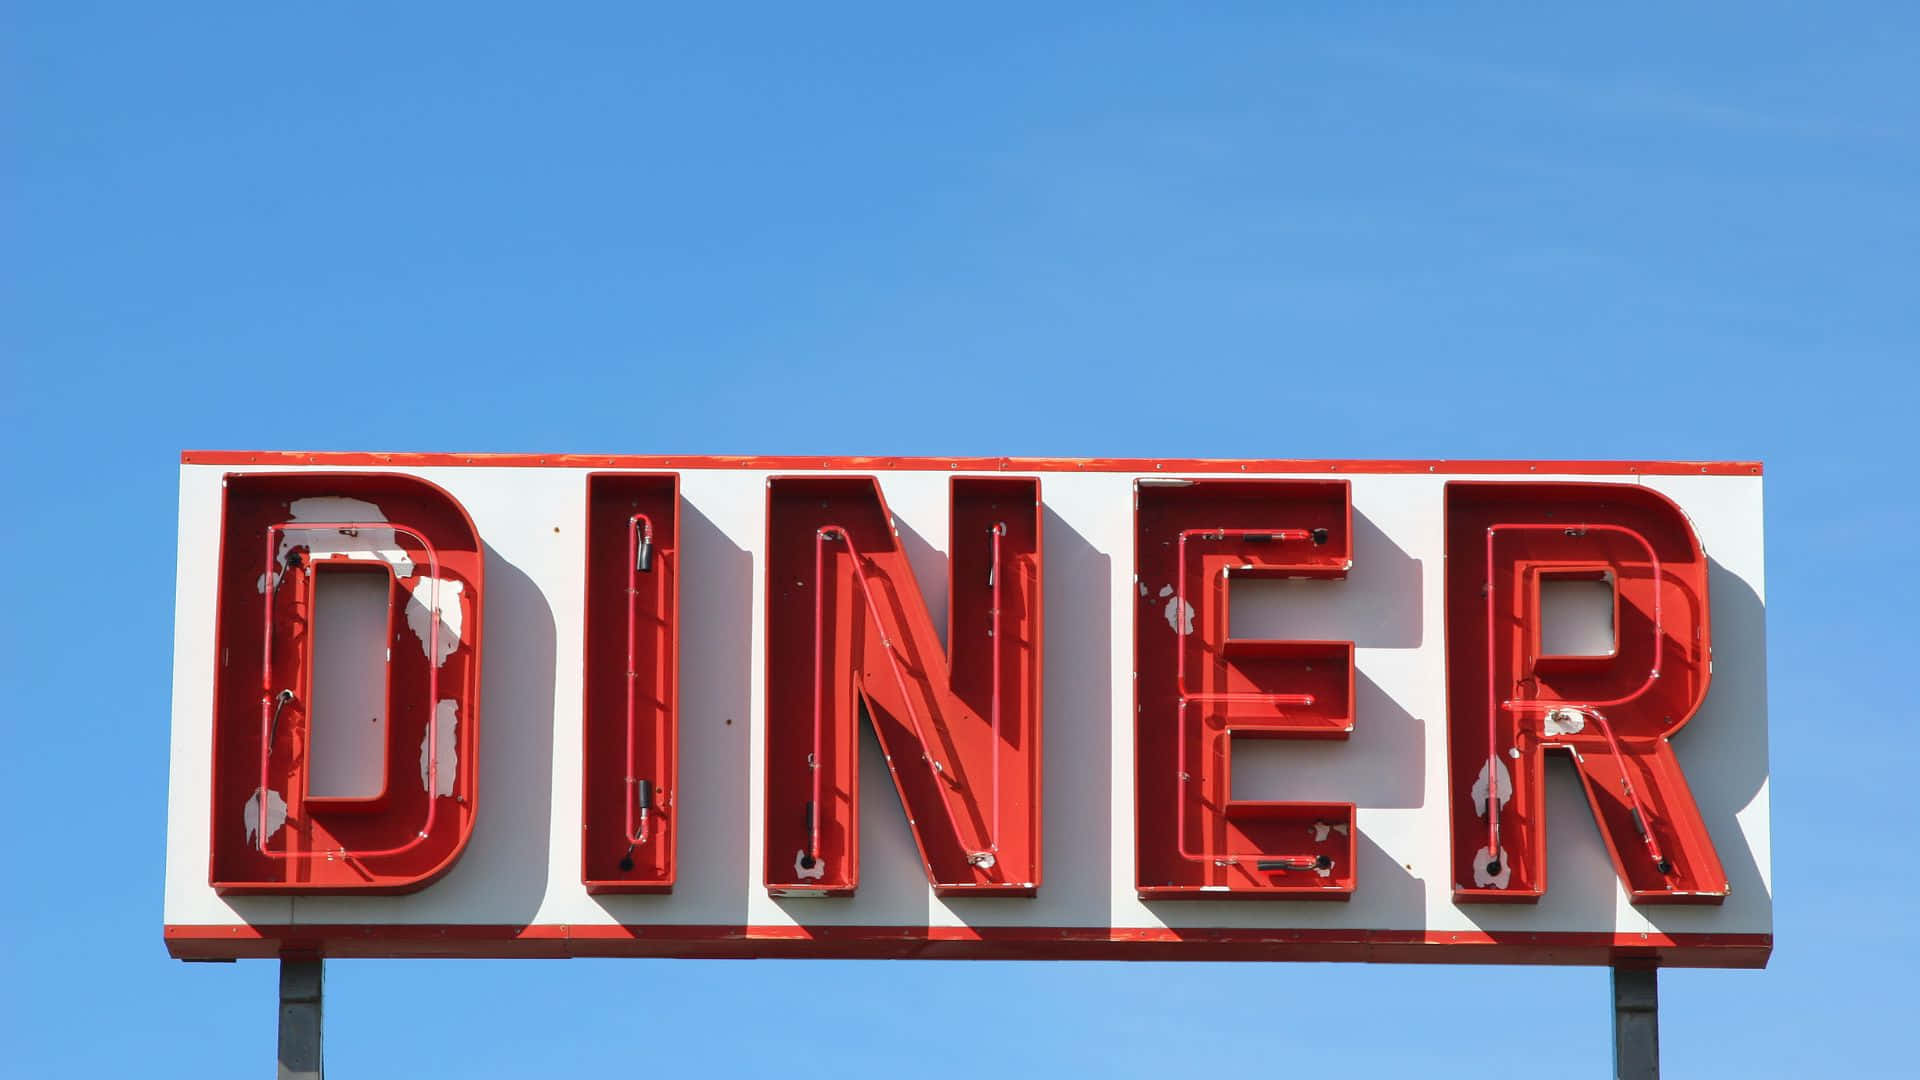 Retro diner aesthetics with neon lights and vintage interior